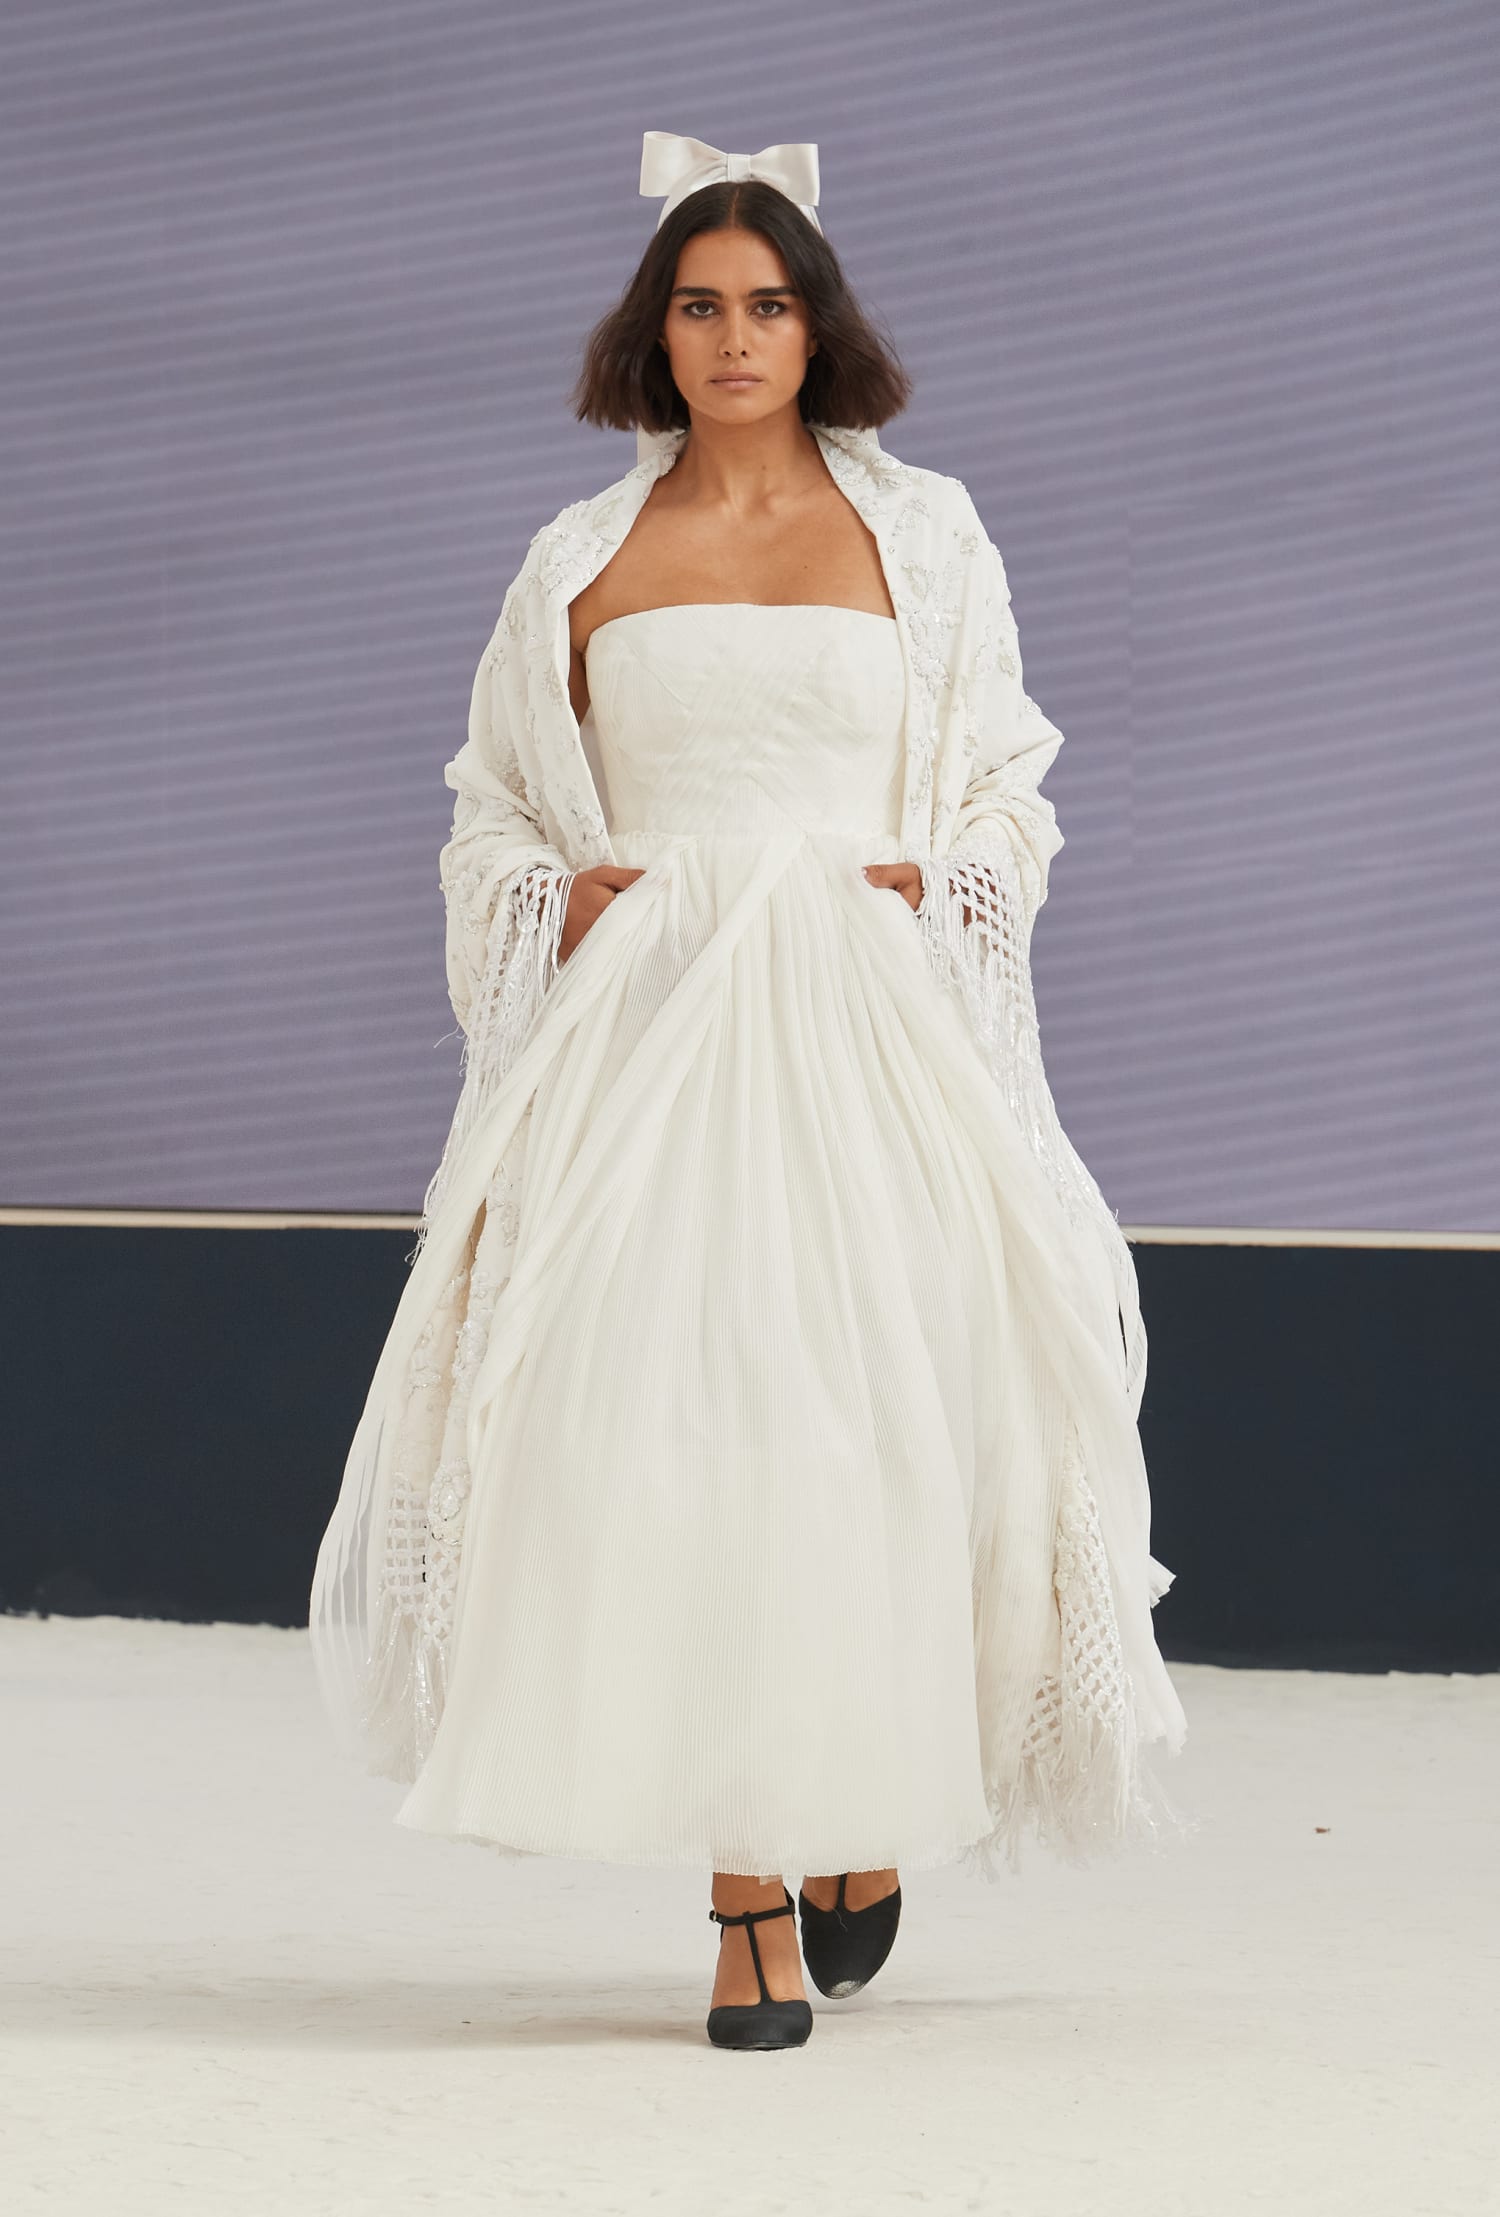 Chanel haute couture fall 2022-2023: an overview